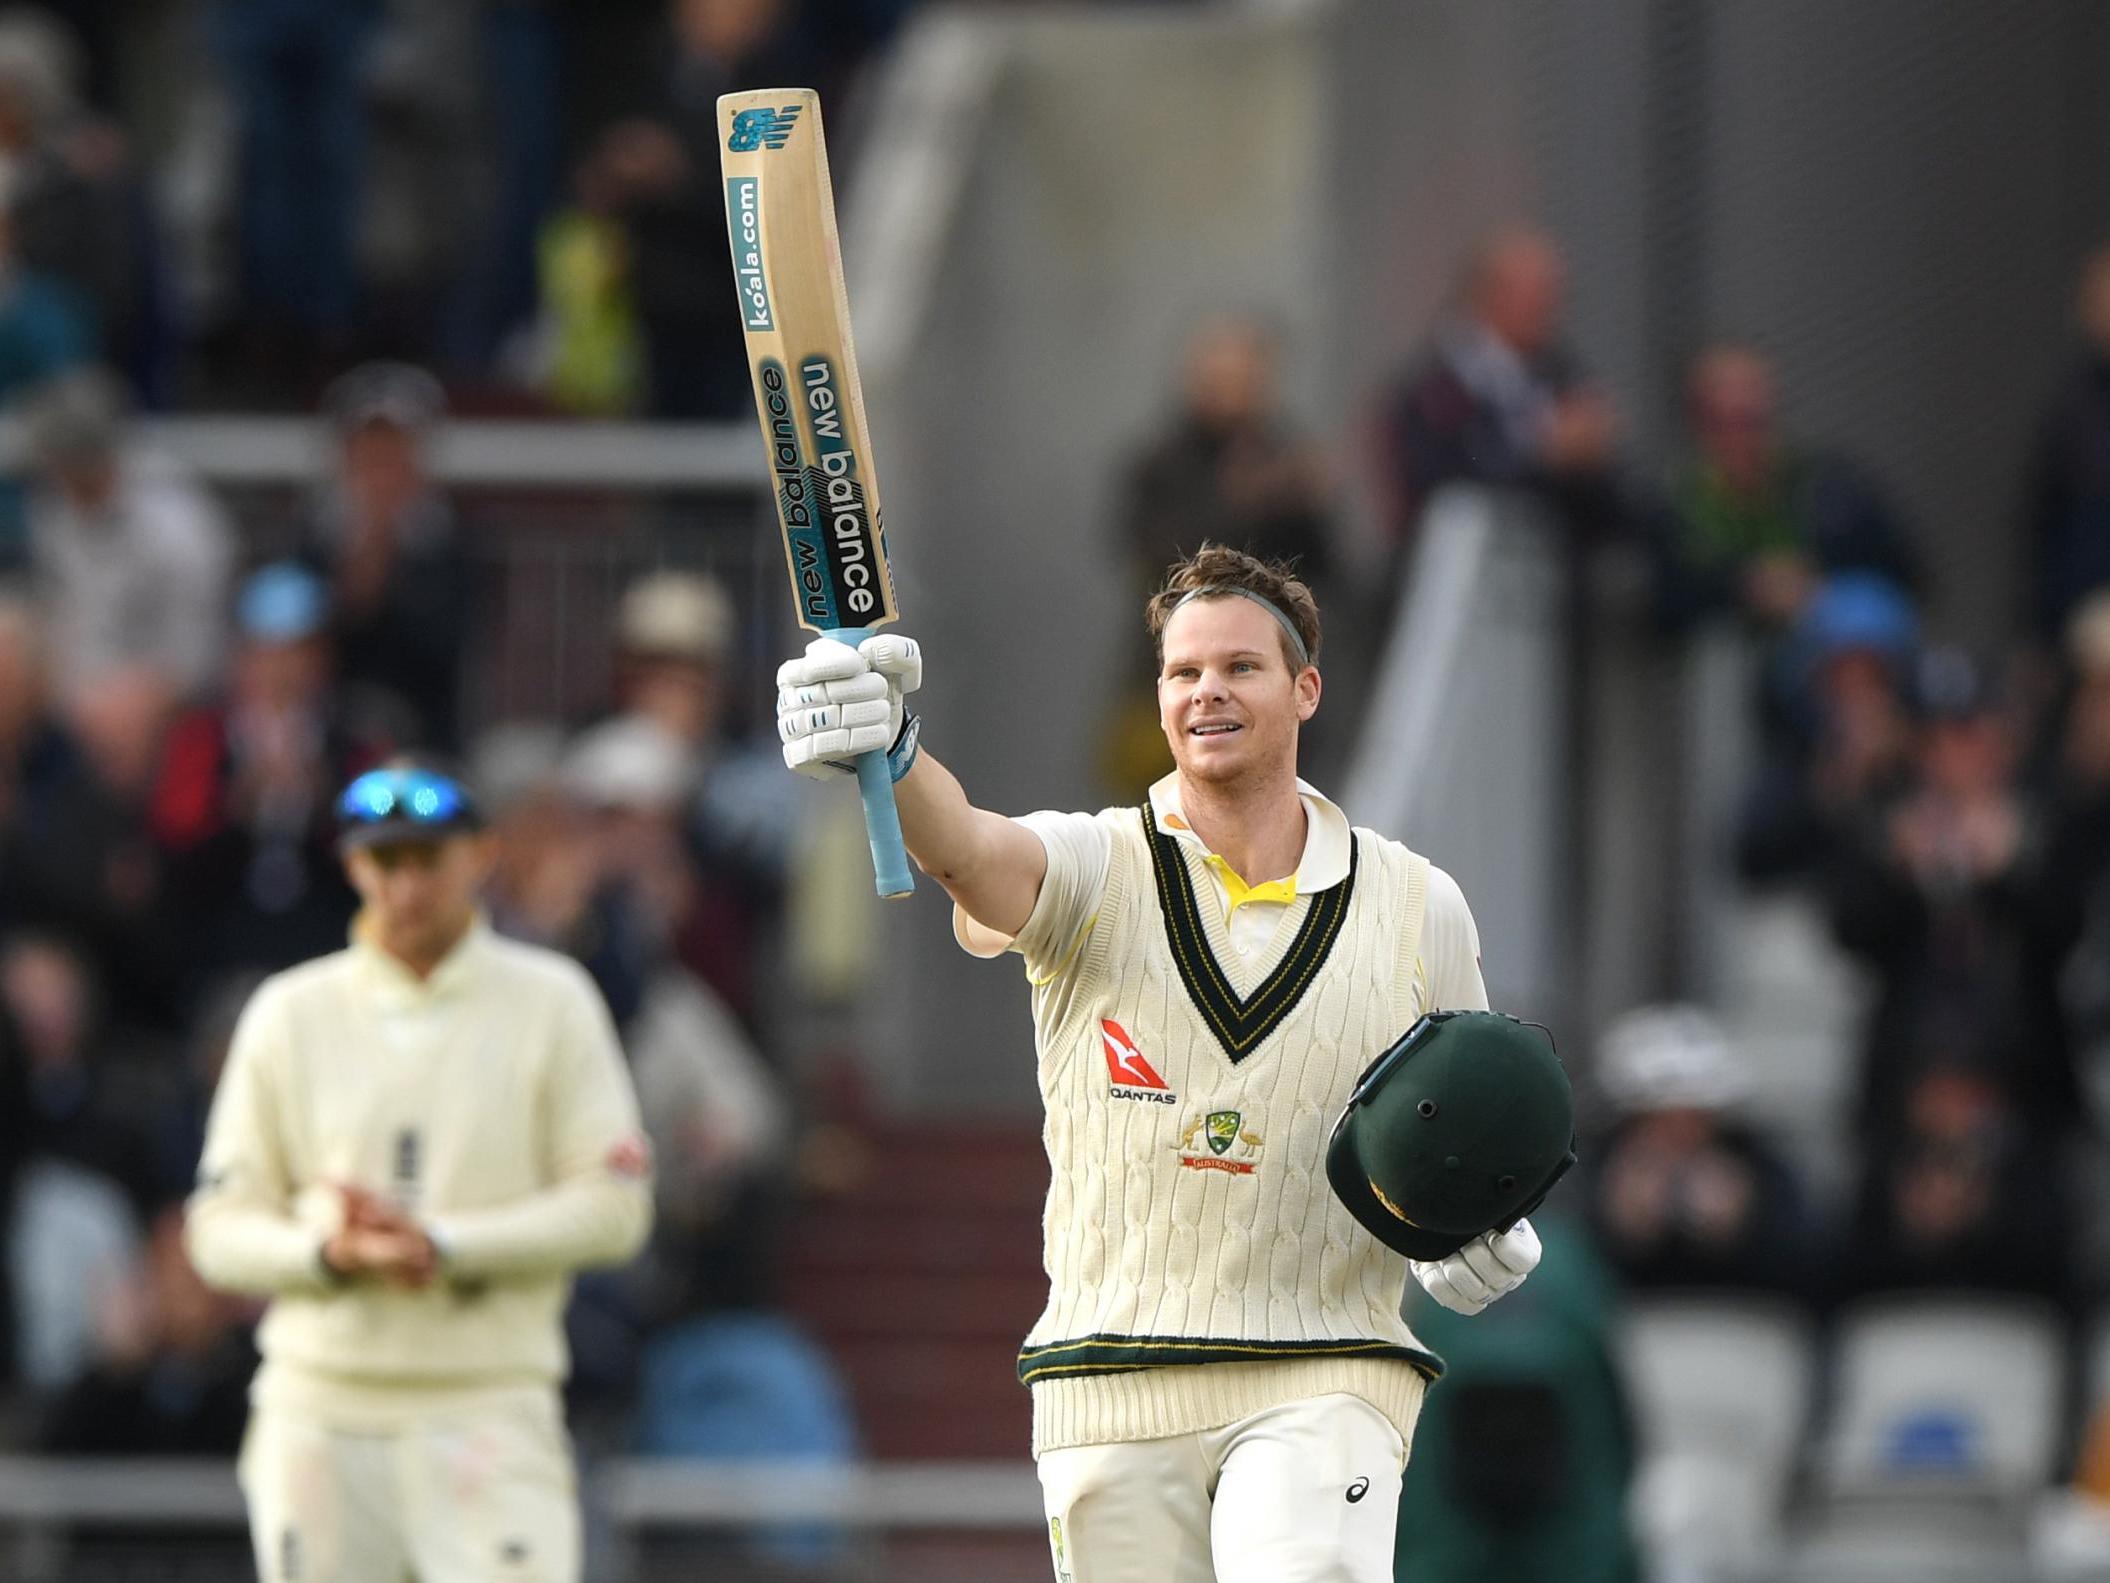 The Australian celebrates after reaching his double century